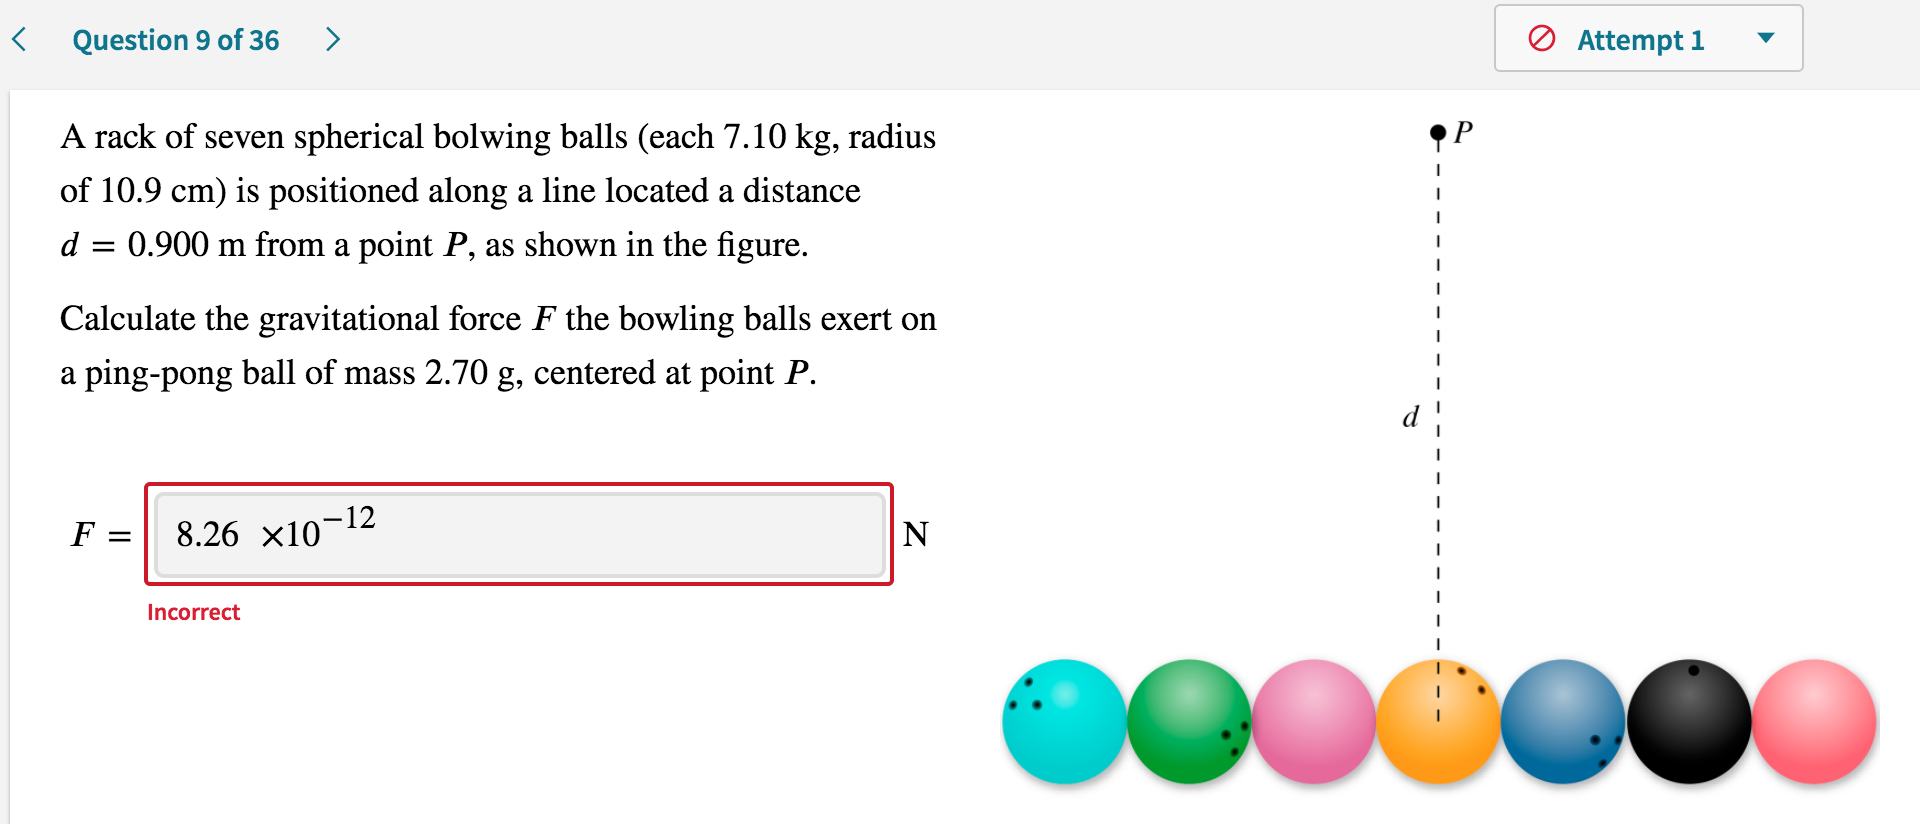 A rack of seven spherical bolwing balls (each 7.10 kg, radius
of 10.9 cm) is positioned along a line located a distance
d = 0.900 m from a point P, as shown in the figure.
Calculate the gravitational force F the bowling balls exert on
a ping-pong ball of mass 2.70 g, centered at point P.
F = 8.26 x10¬12
N
Incorrect
